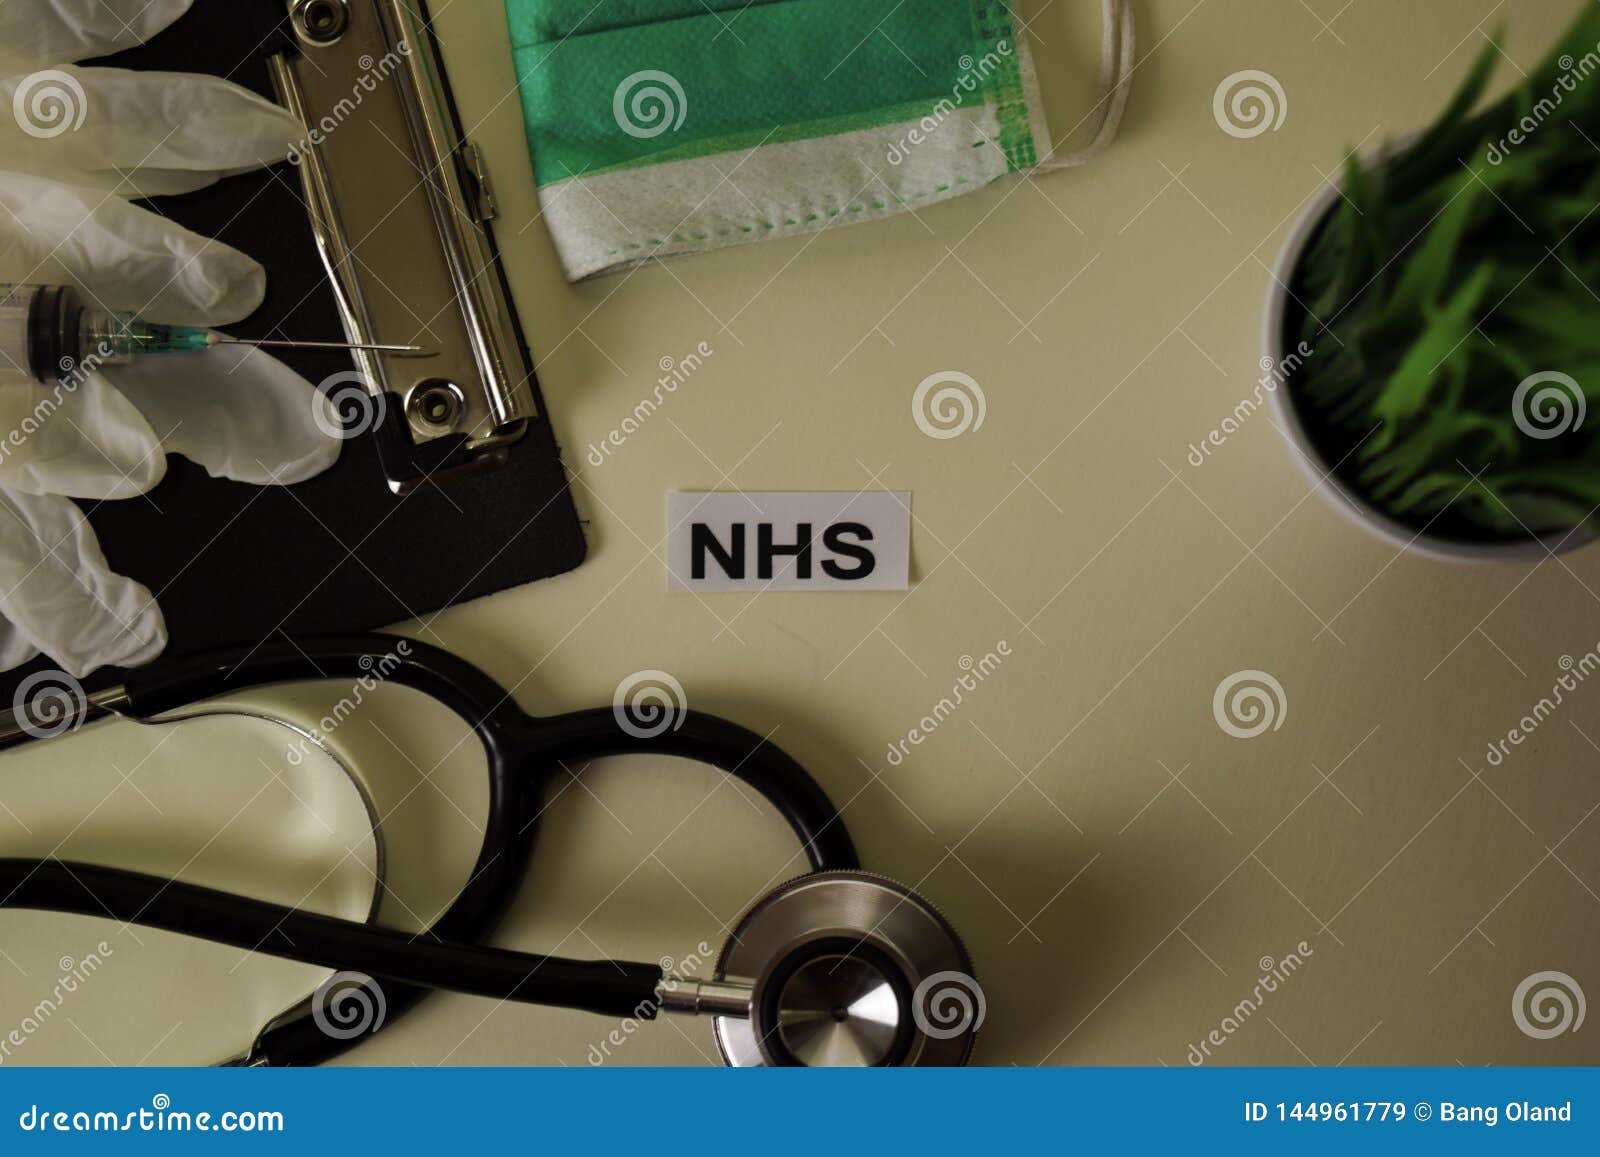 nhs with inspiration and healthcare/medical concept on desk background